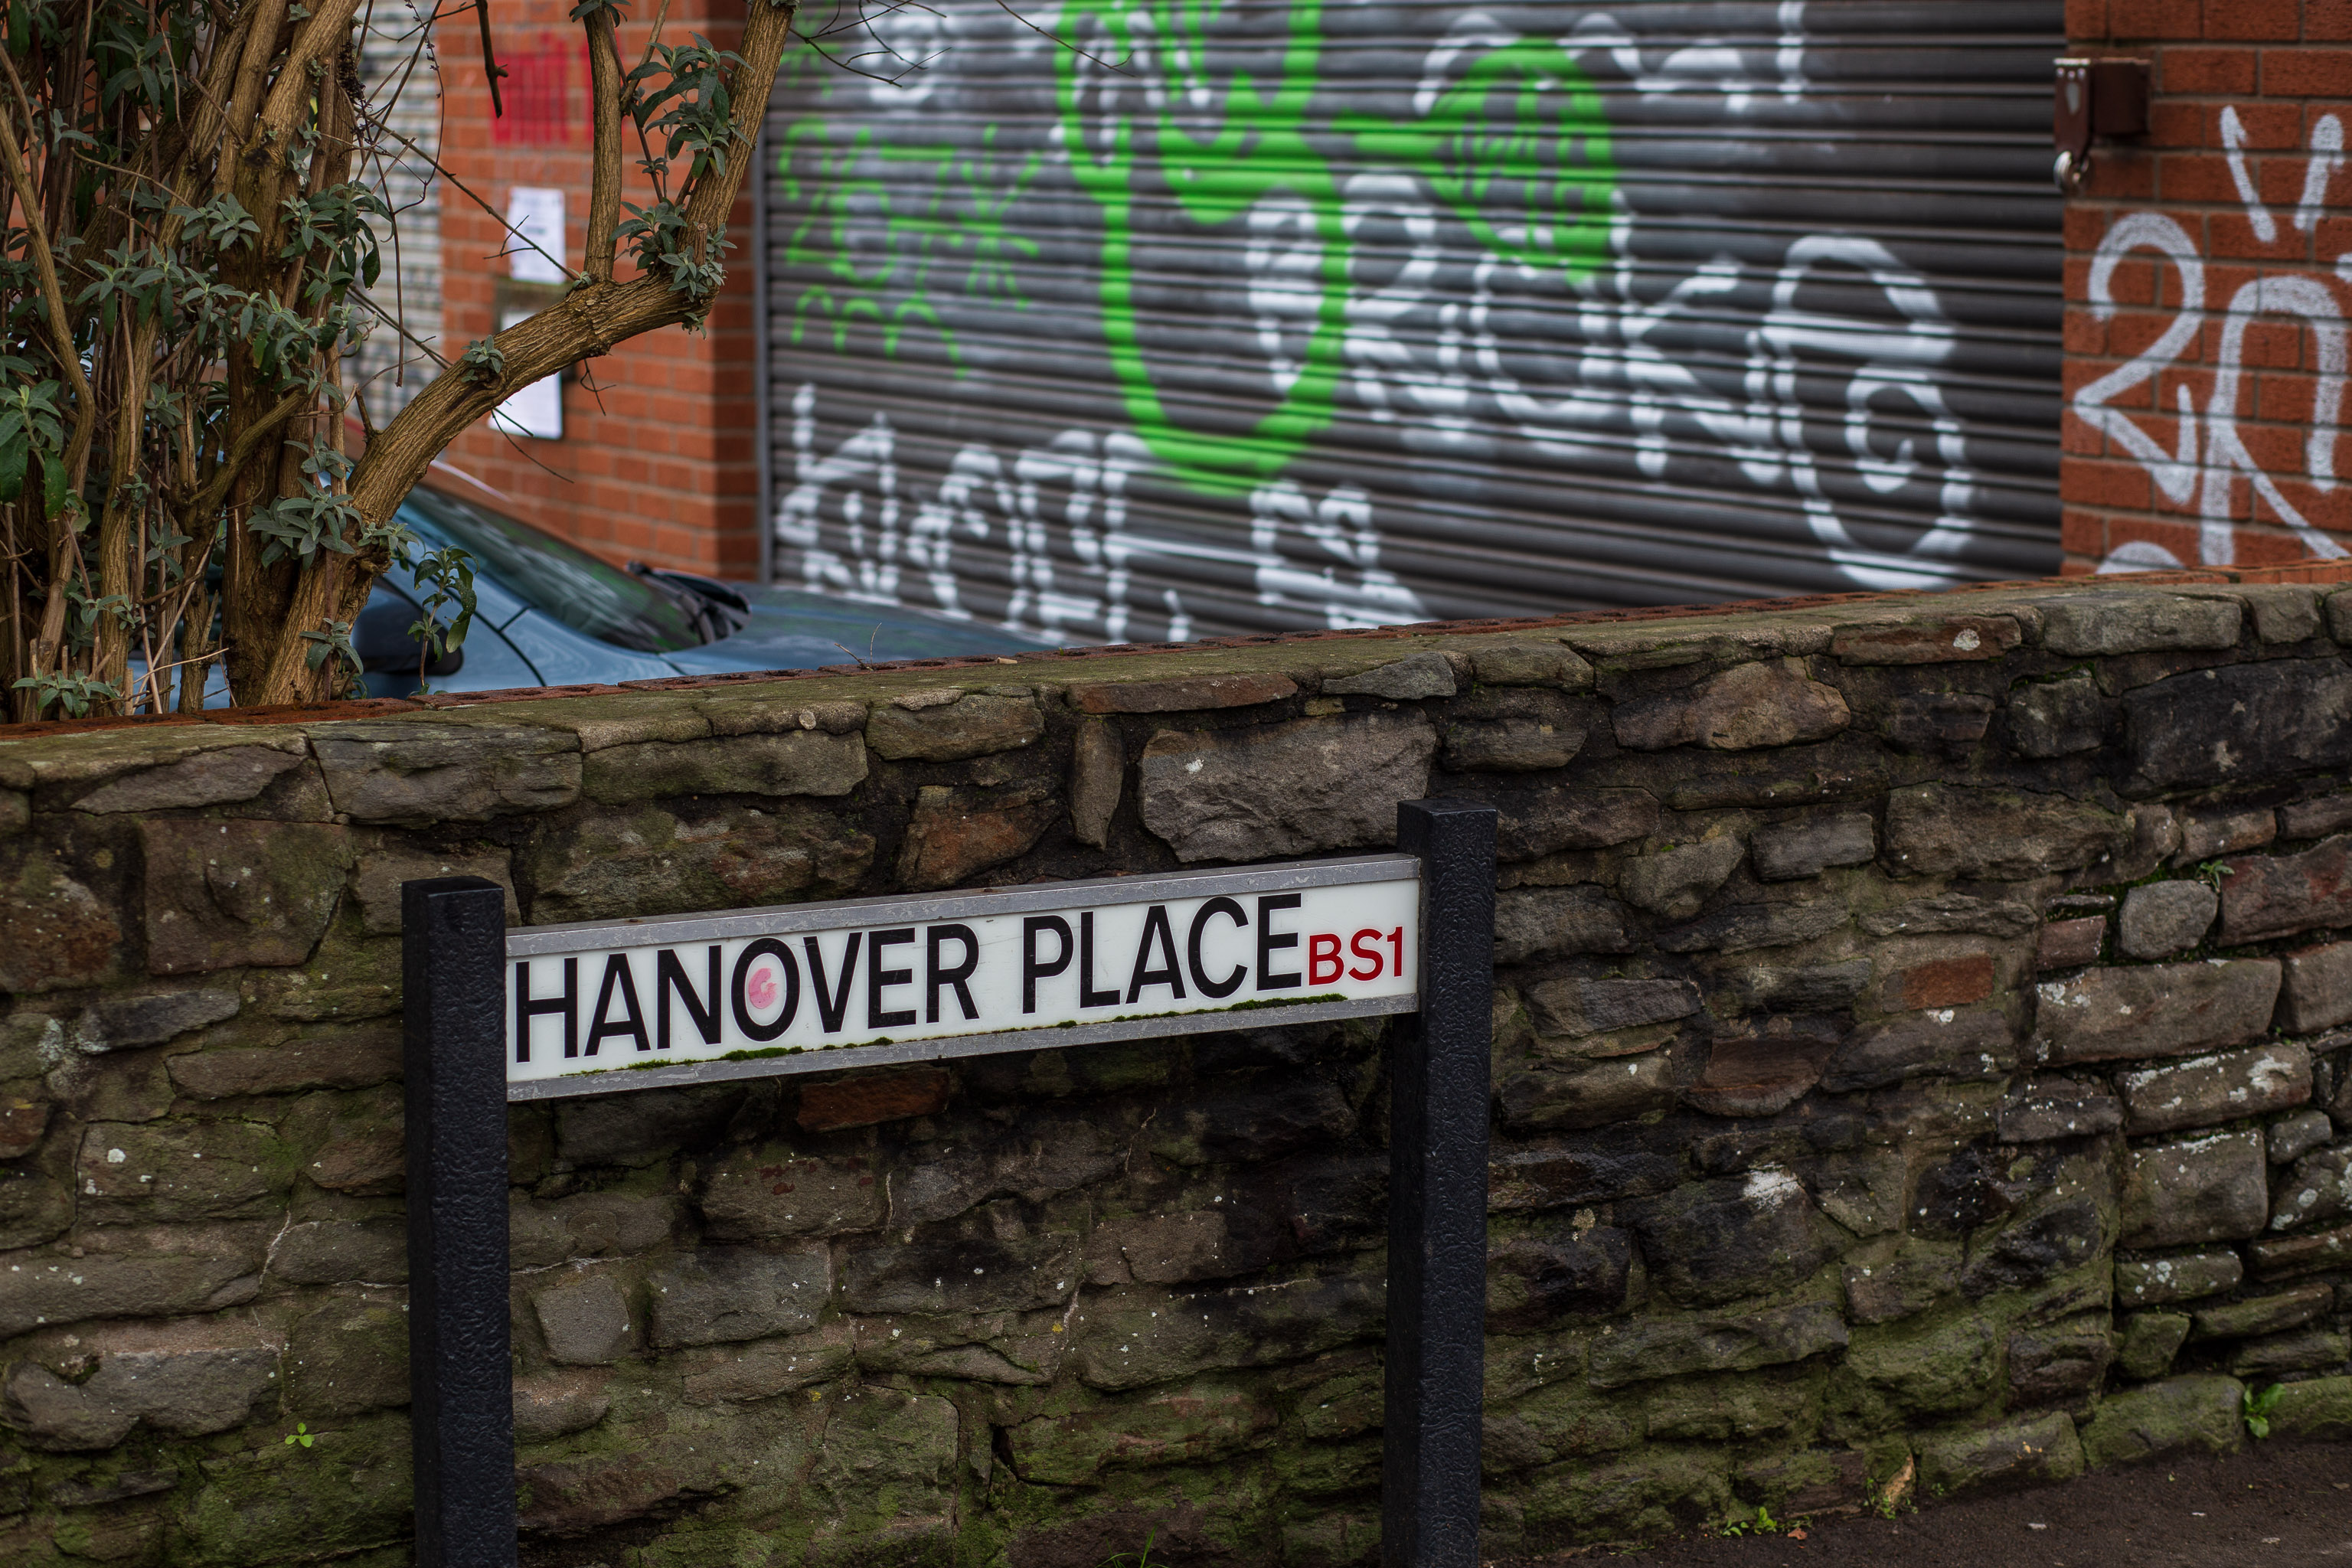 Hanover Place
Bristol has been twinned with Hanover since 1947. Yesterday I walked the length of Hanover Lane; today I passed Hanover Place.
